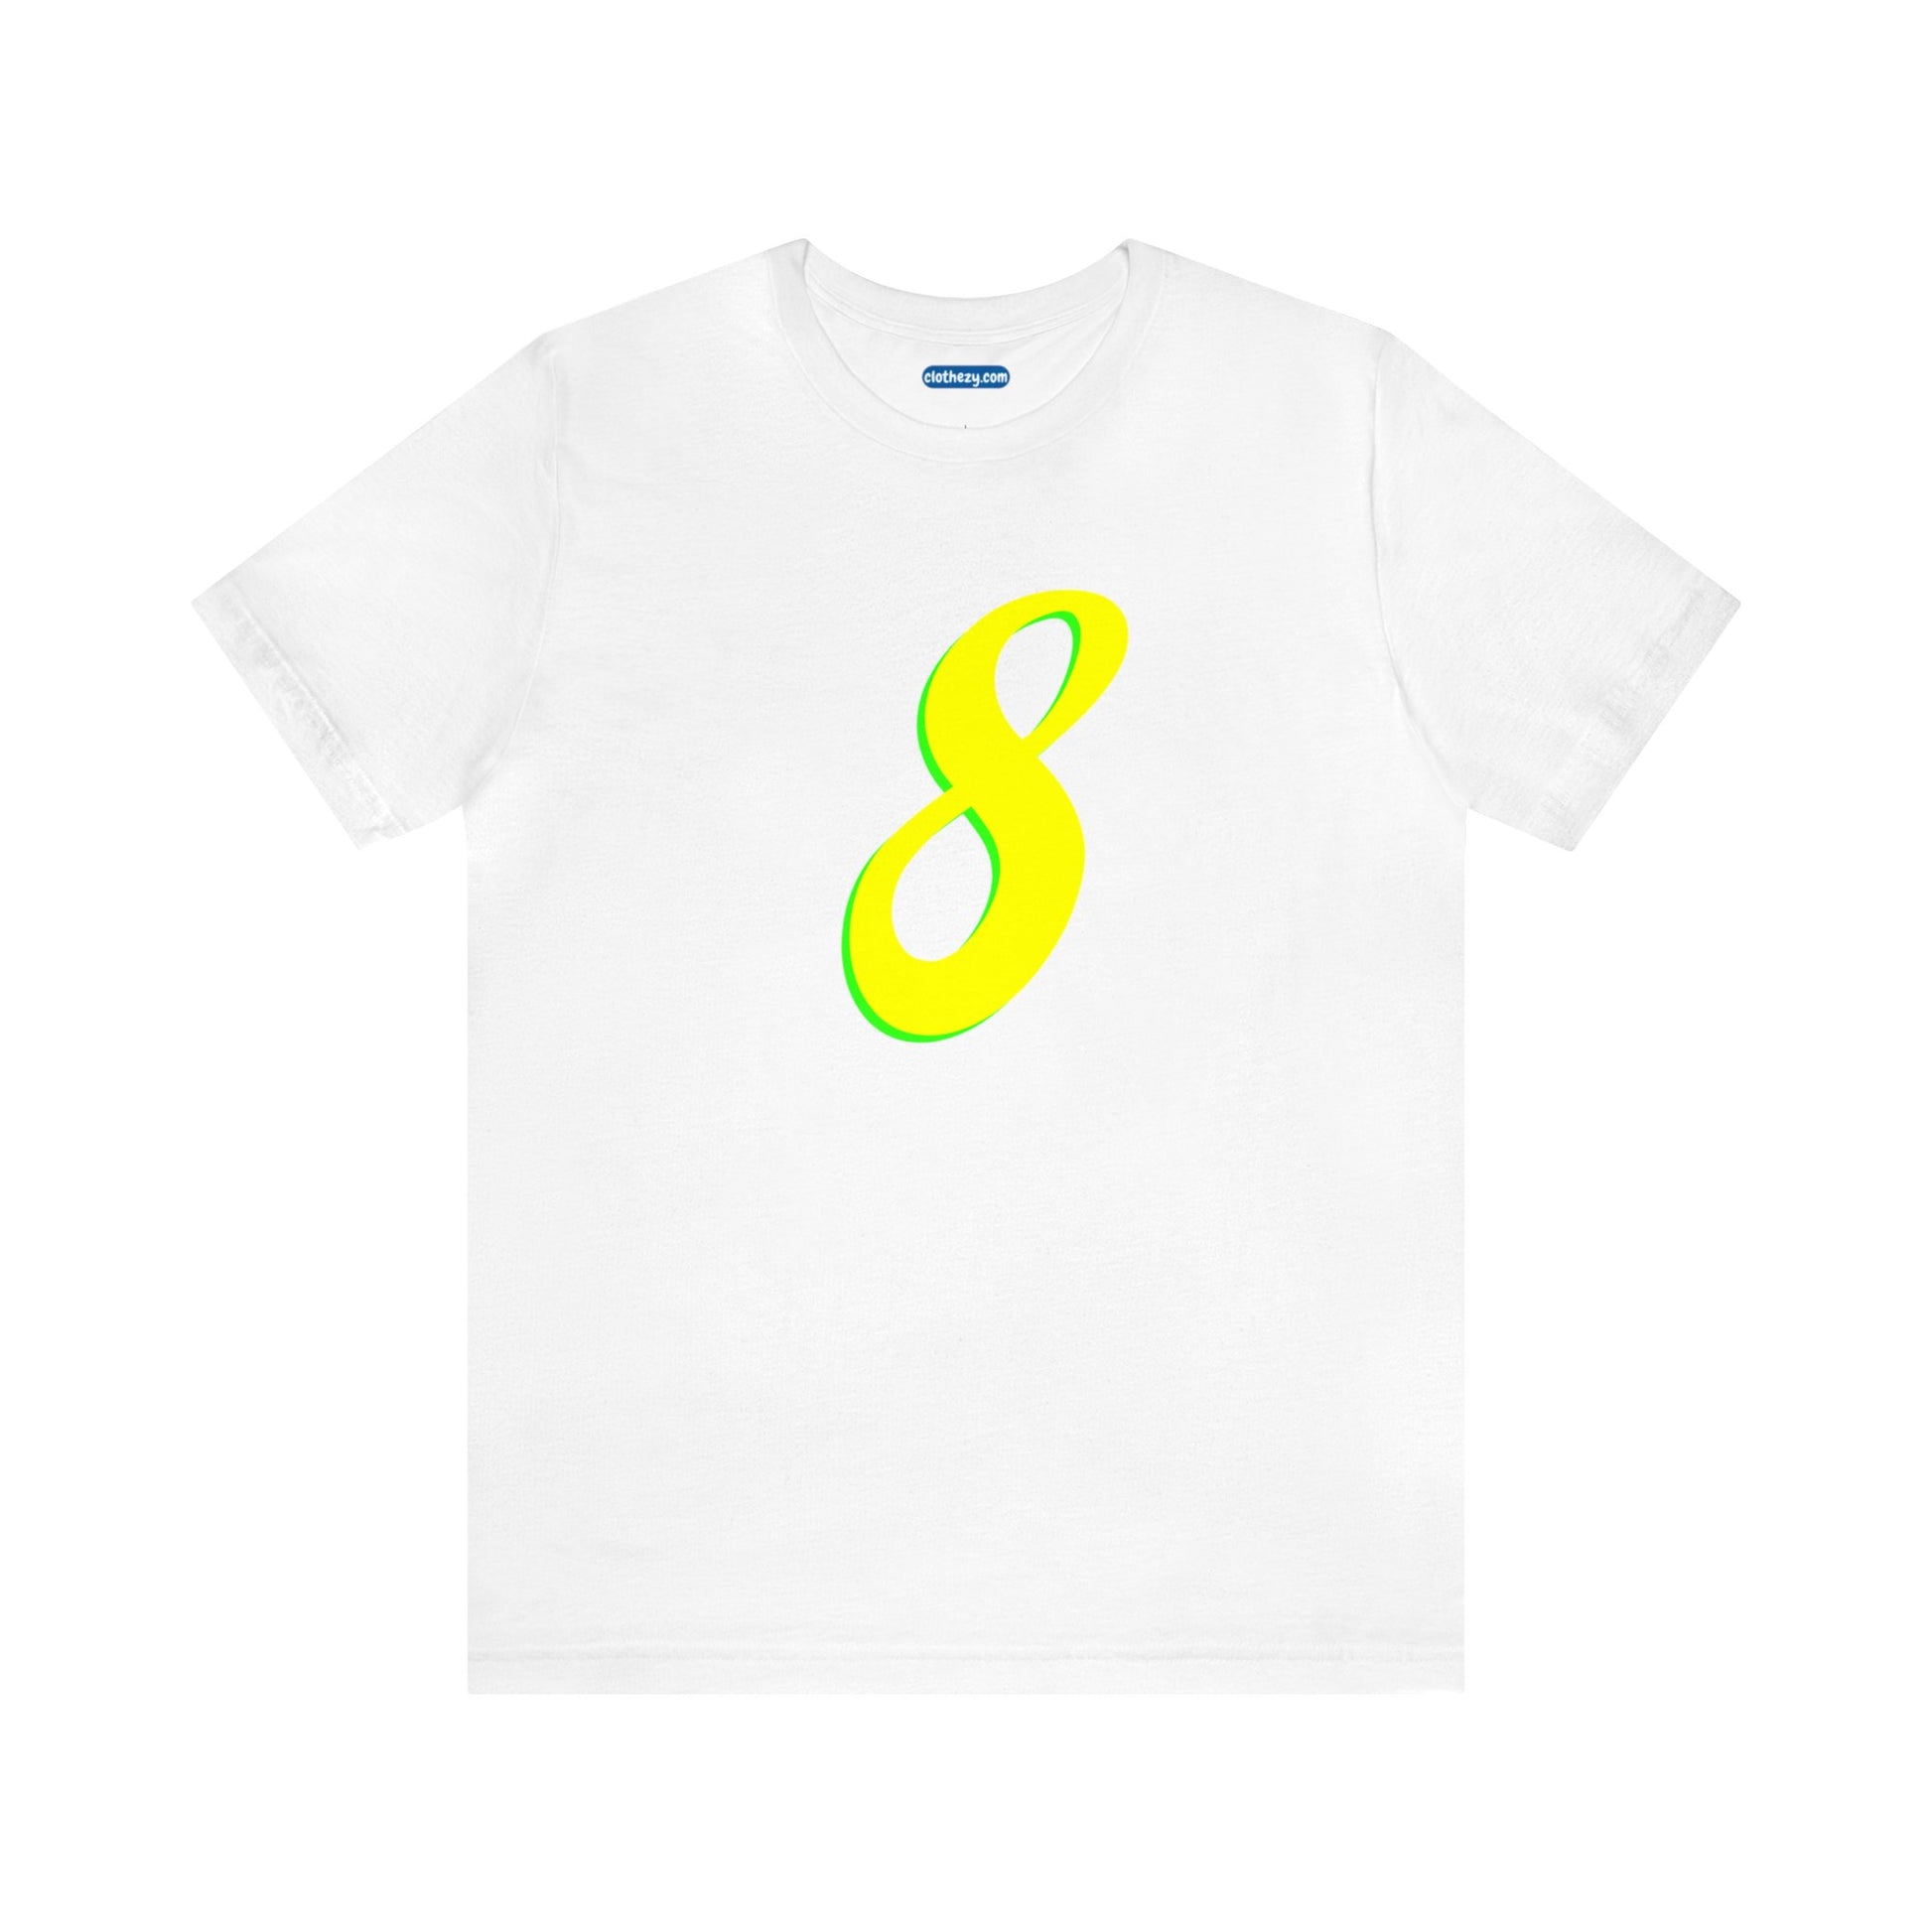 Number 8 Design - Soft Cotton Tee for birthdays and celebrations, Gift for friends and family, Multiple Options by clothezy.com in White Size Small - Buy Now